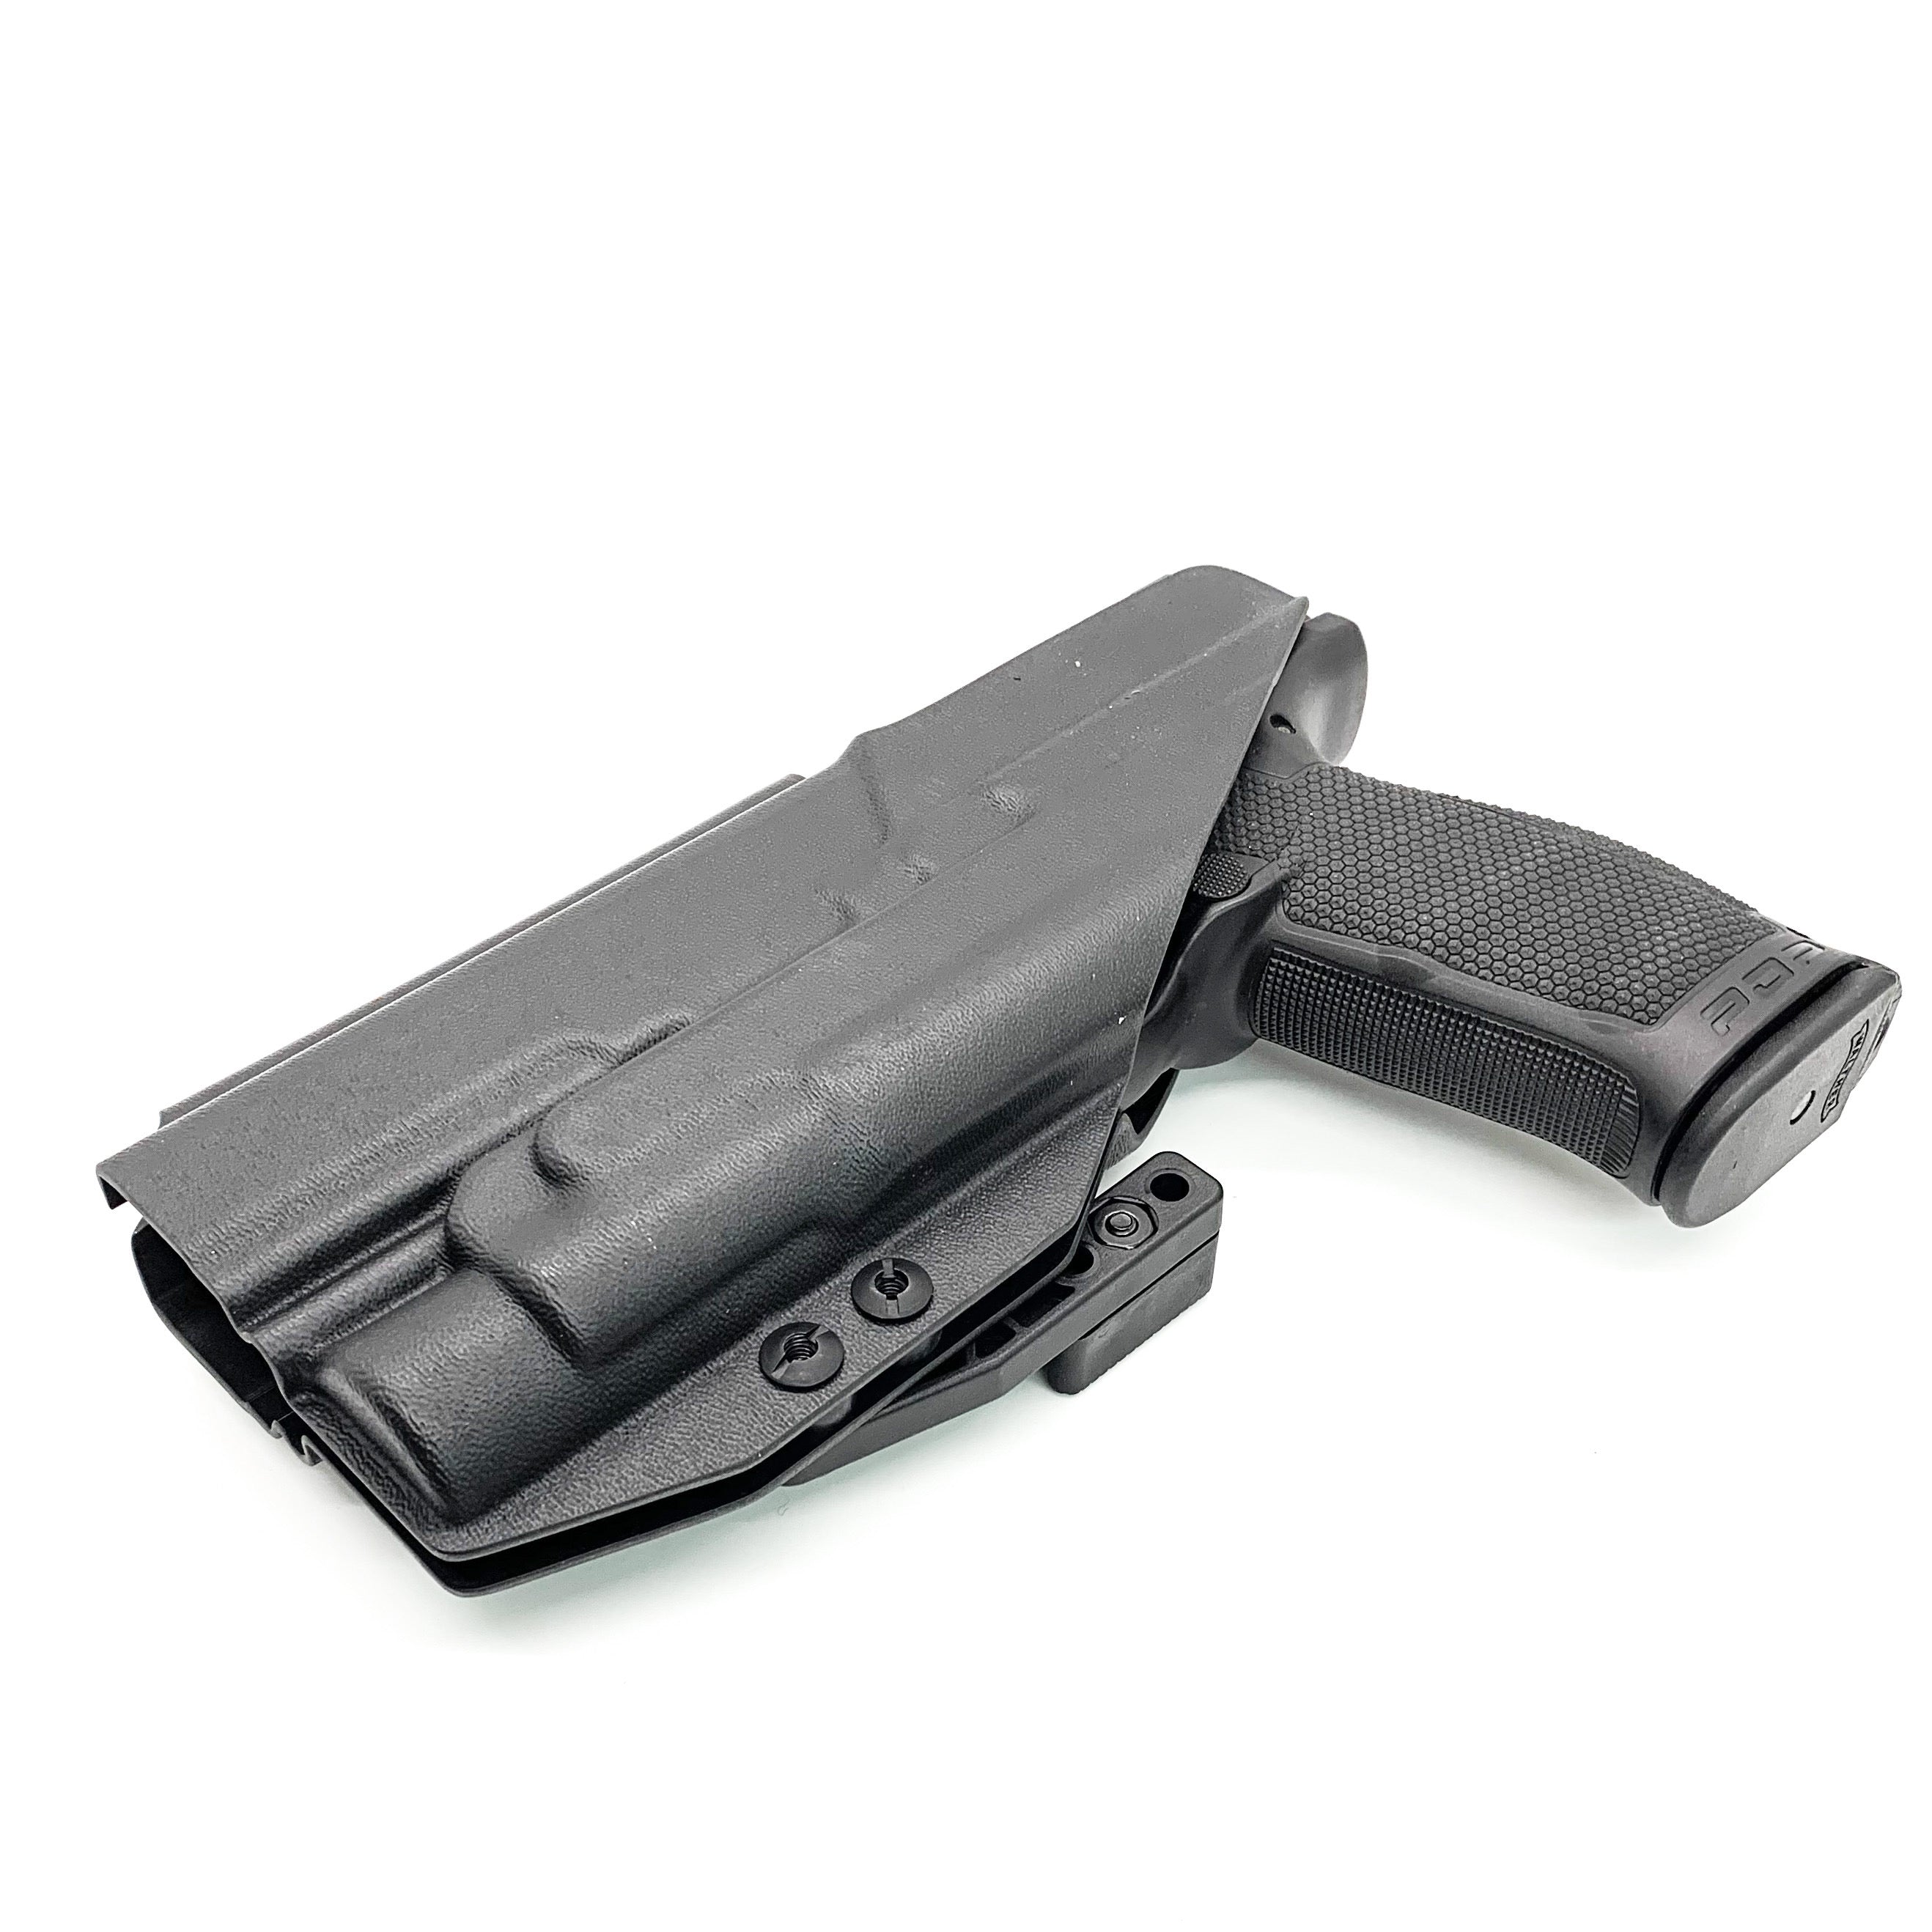 For the best concealed carry Inside Waistband IWB AIWB Holster designed to fit the Walther PDP 5" Full-Size pistol with the Streamlight TLR-1 or TLR-1HL mounted on the firearm, shop Four Brothers Holsters. Cut for red dot sight, full sweat guard, adjustable retention & open muzzle for threaded barrels & compensators